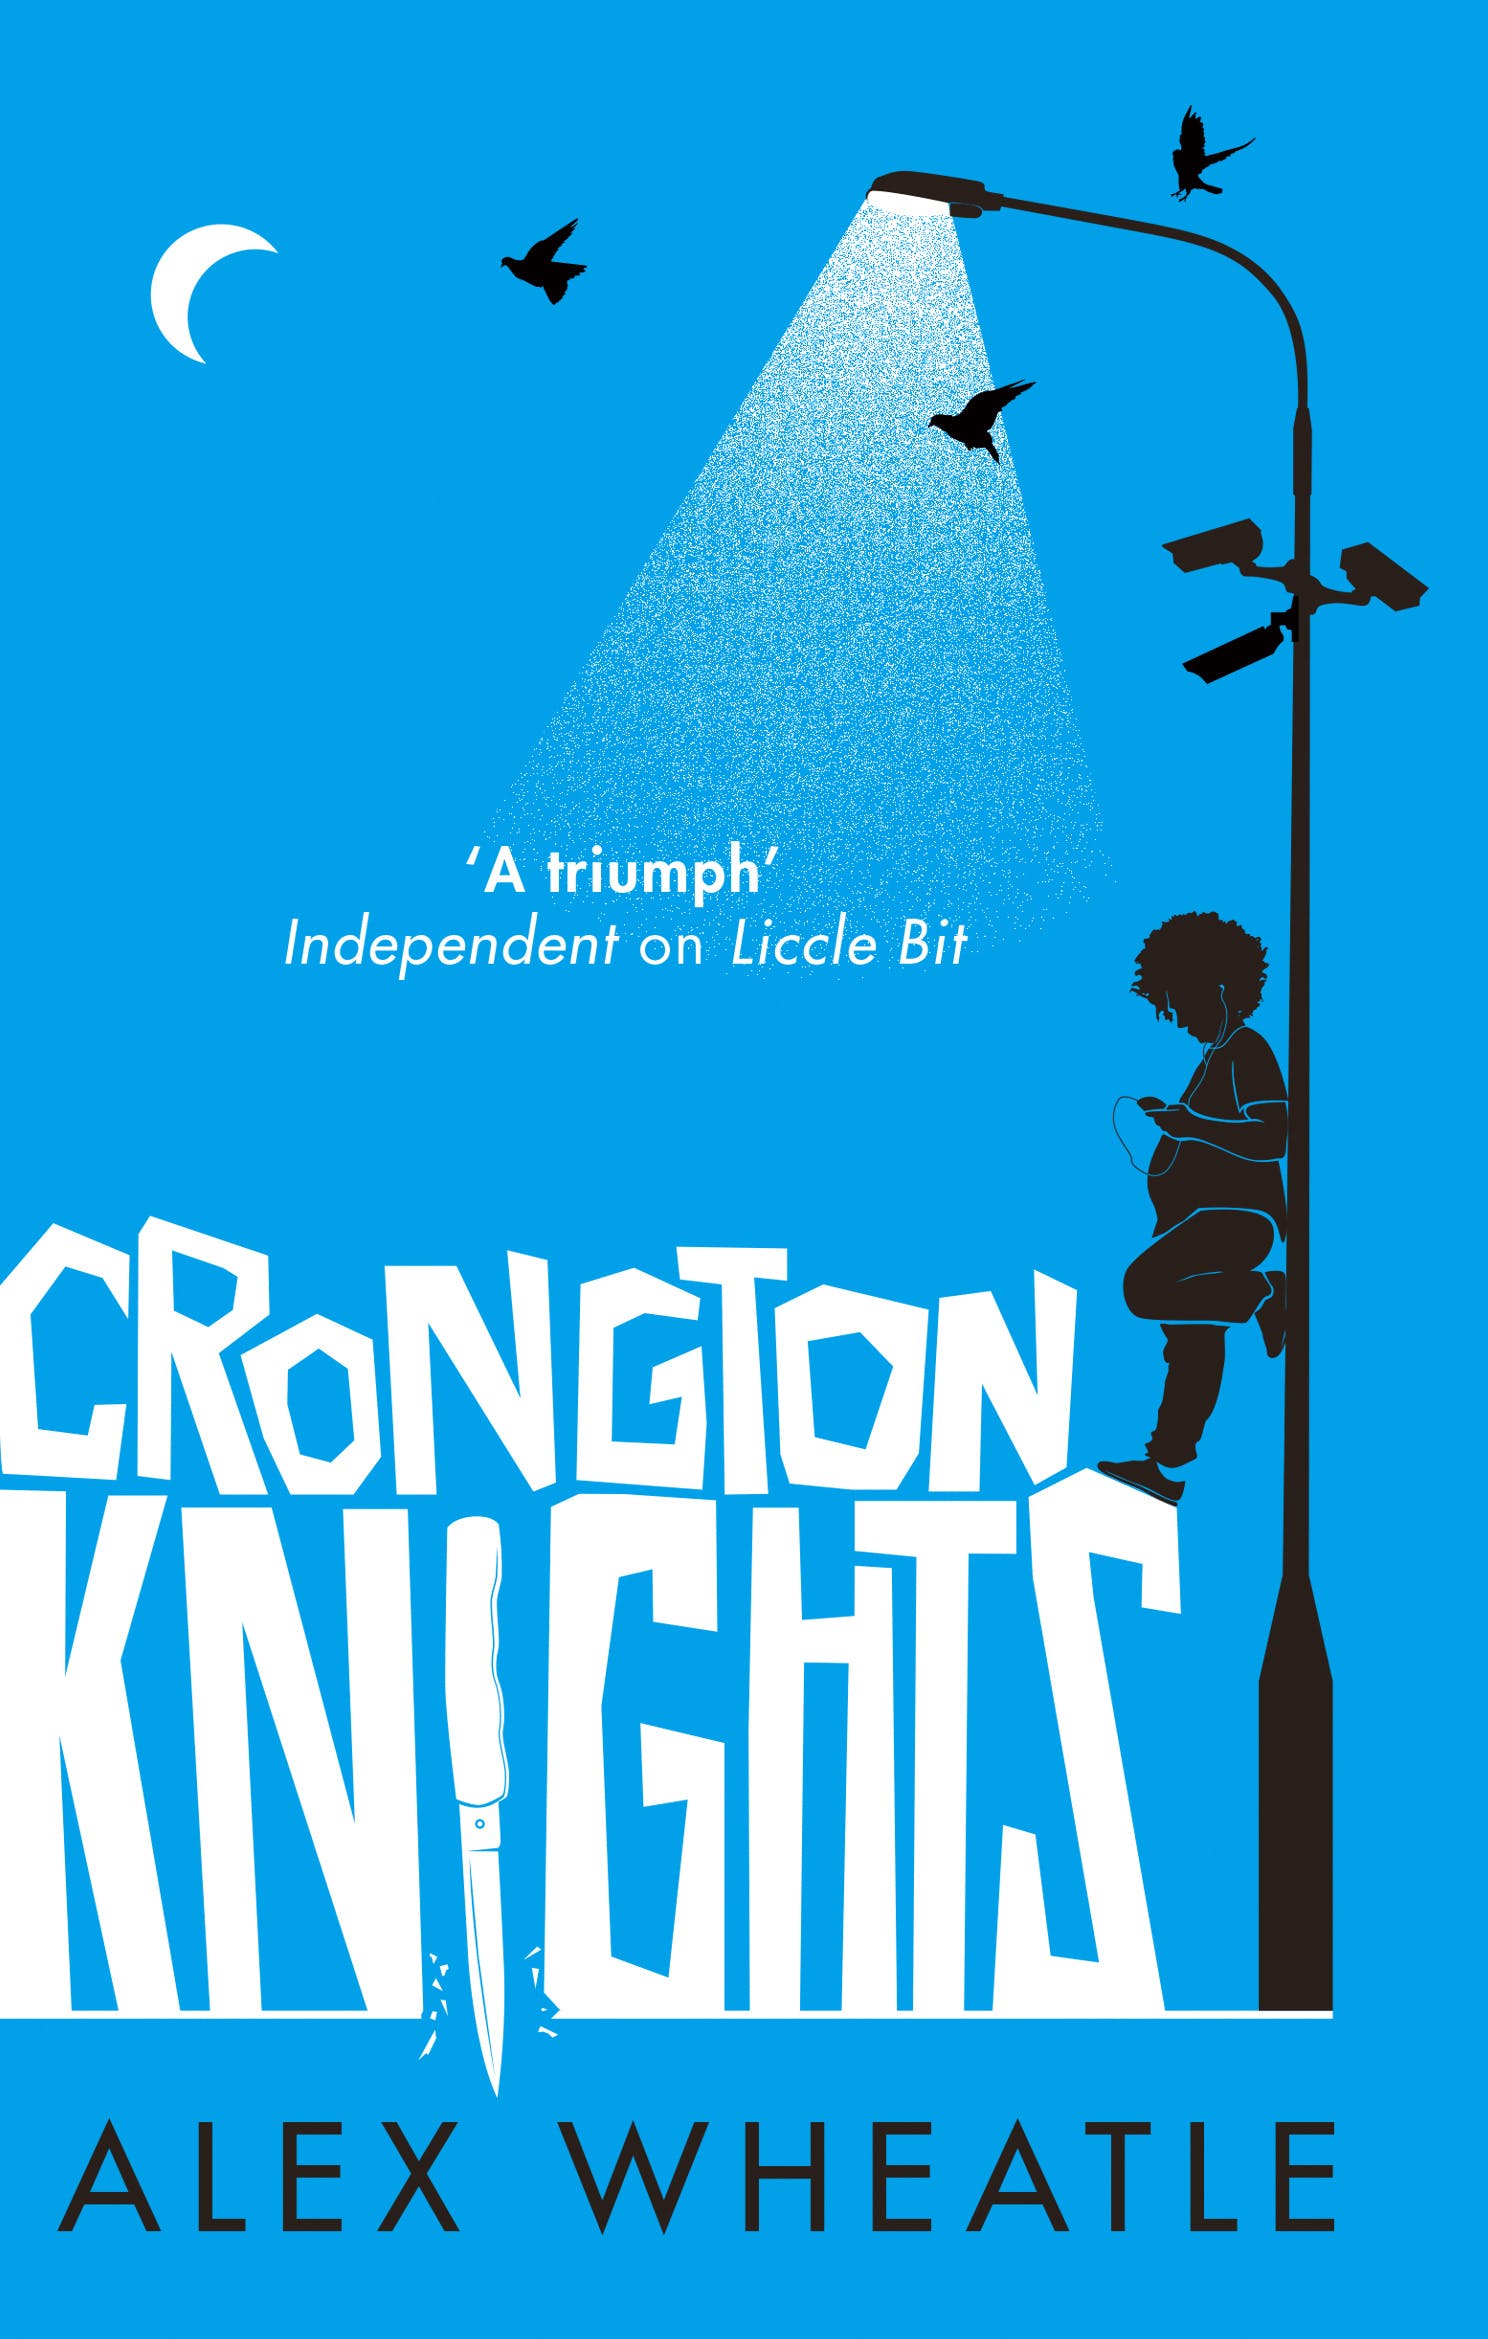 Crongton Knights by Alex Wheatle